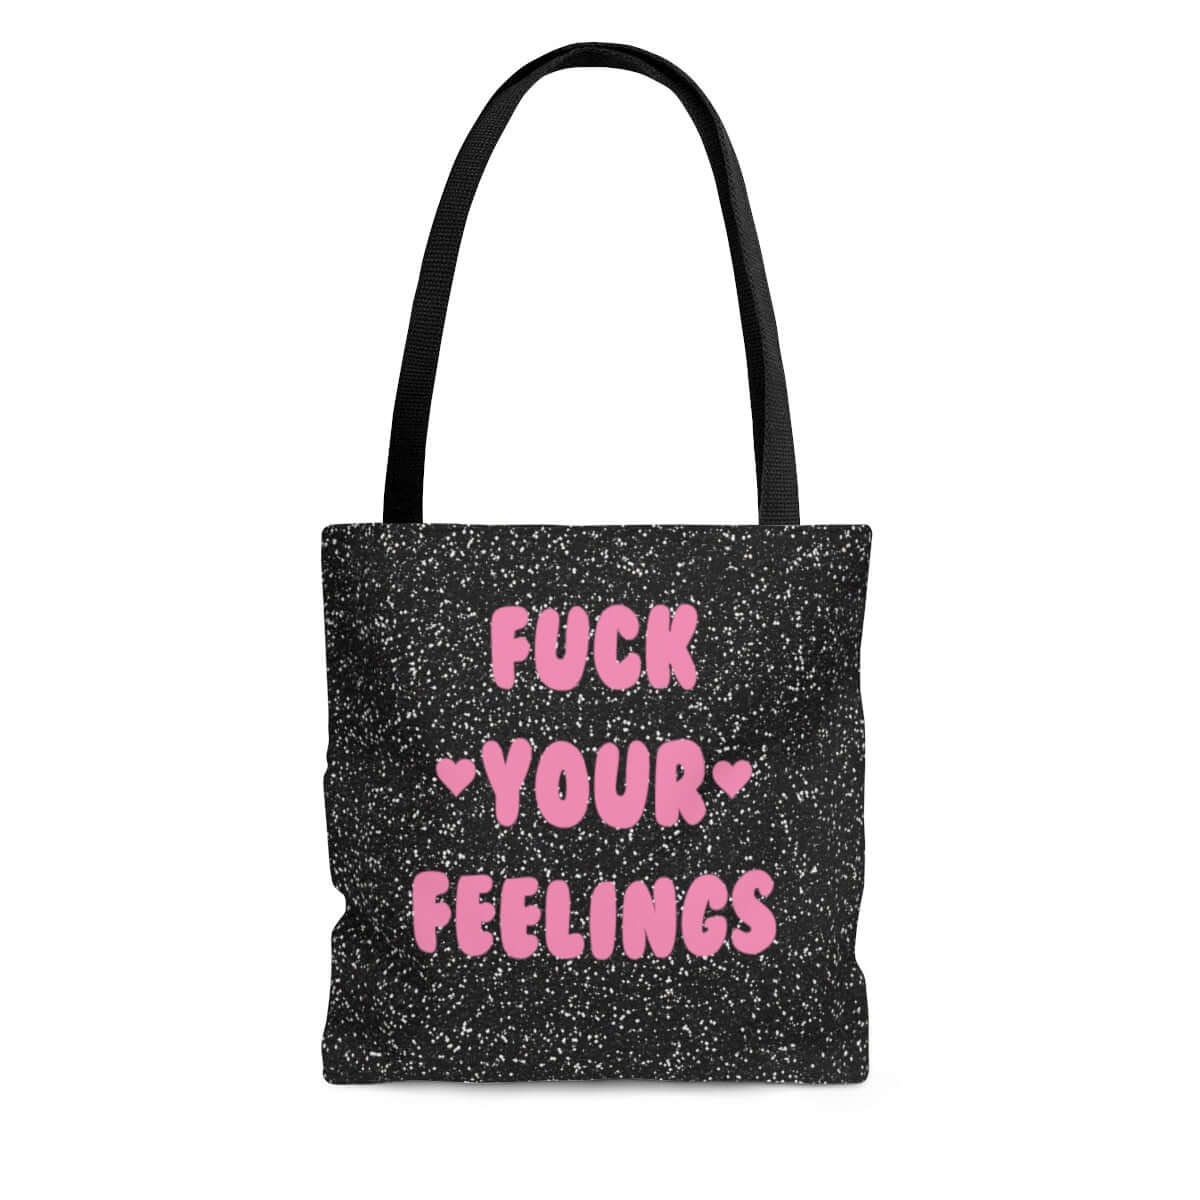 black and pink tote bag that says fuck your feelings